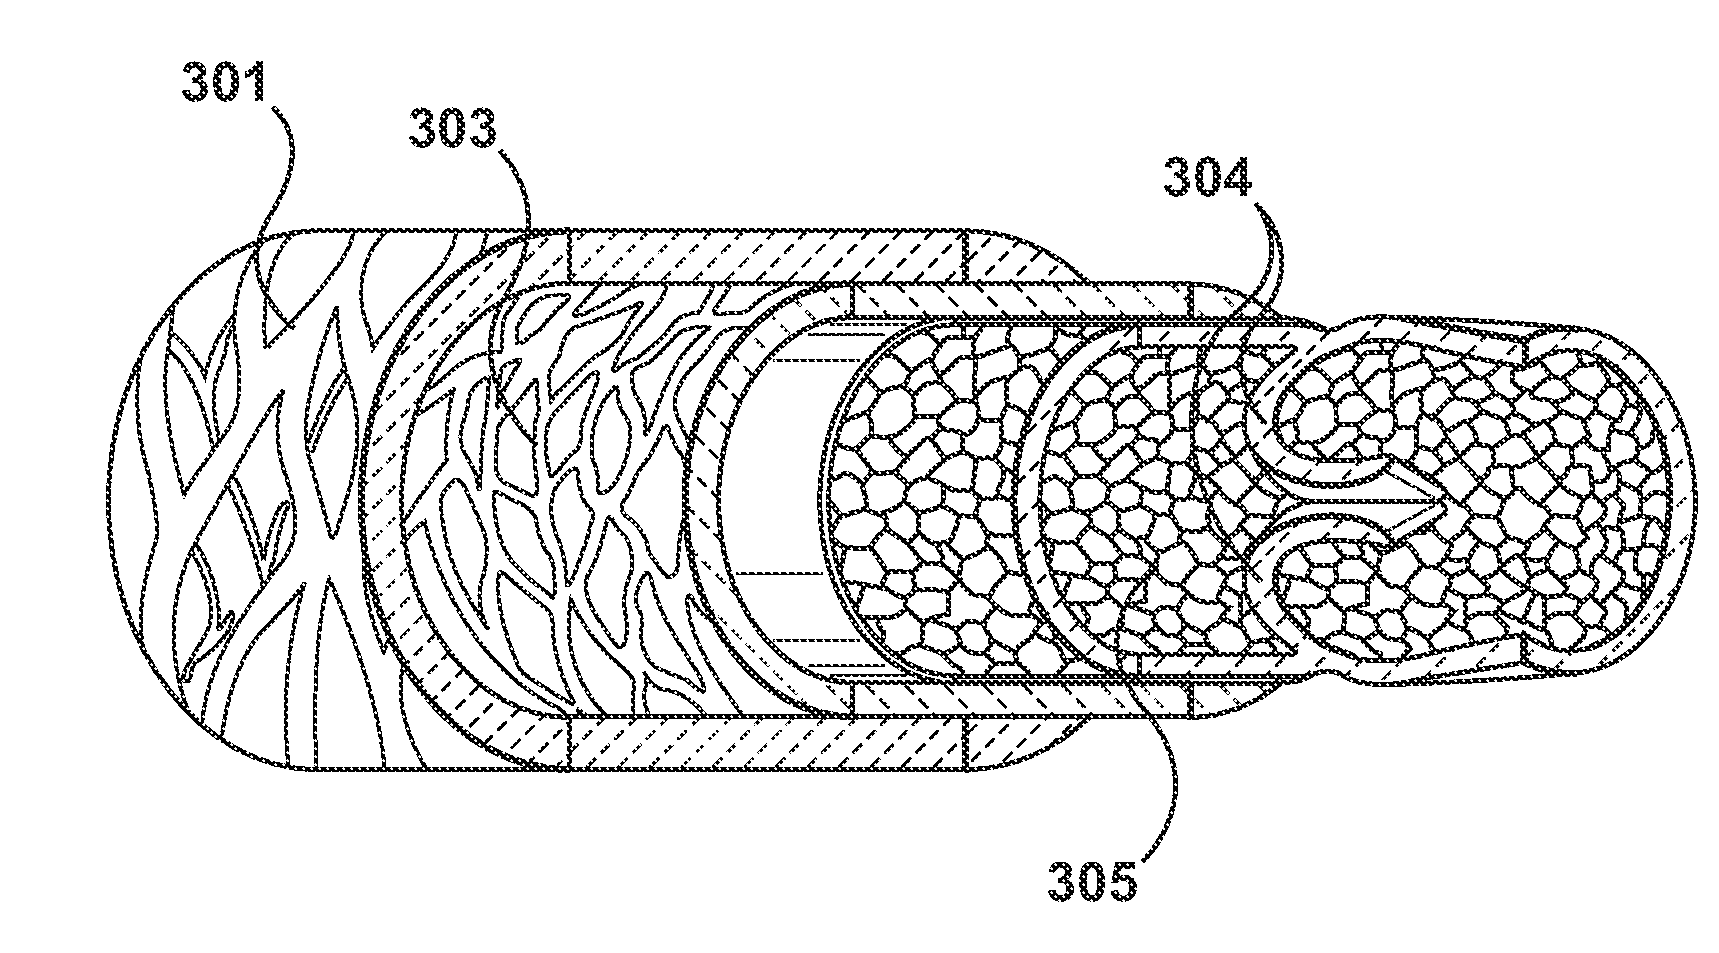 Percutaneous Methods and Apparatus for Creating Native Tissue Venous Valves